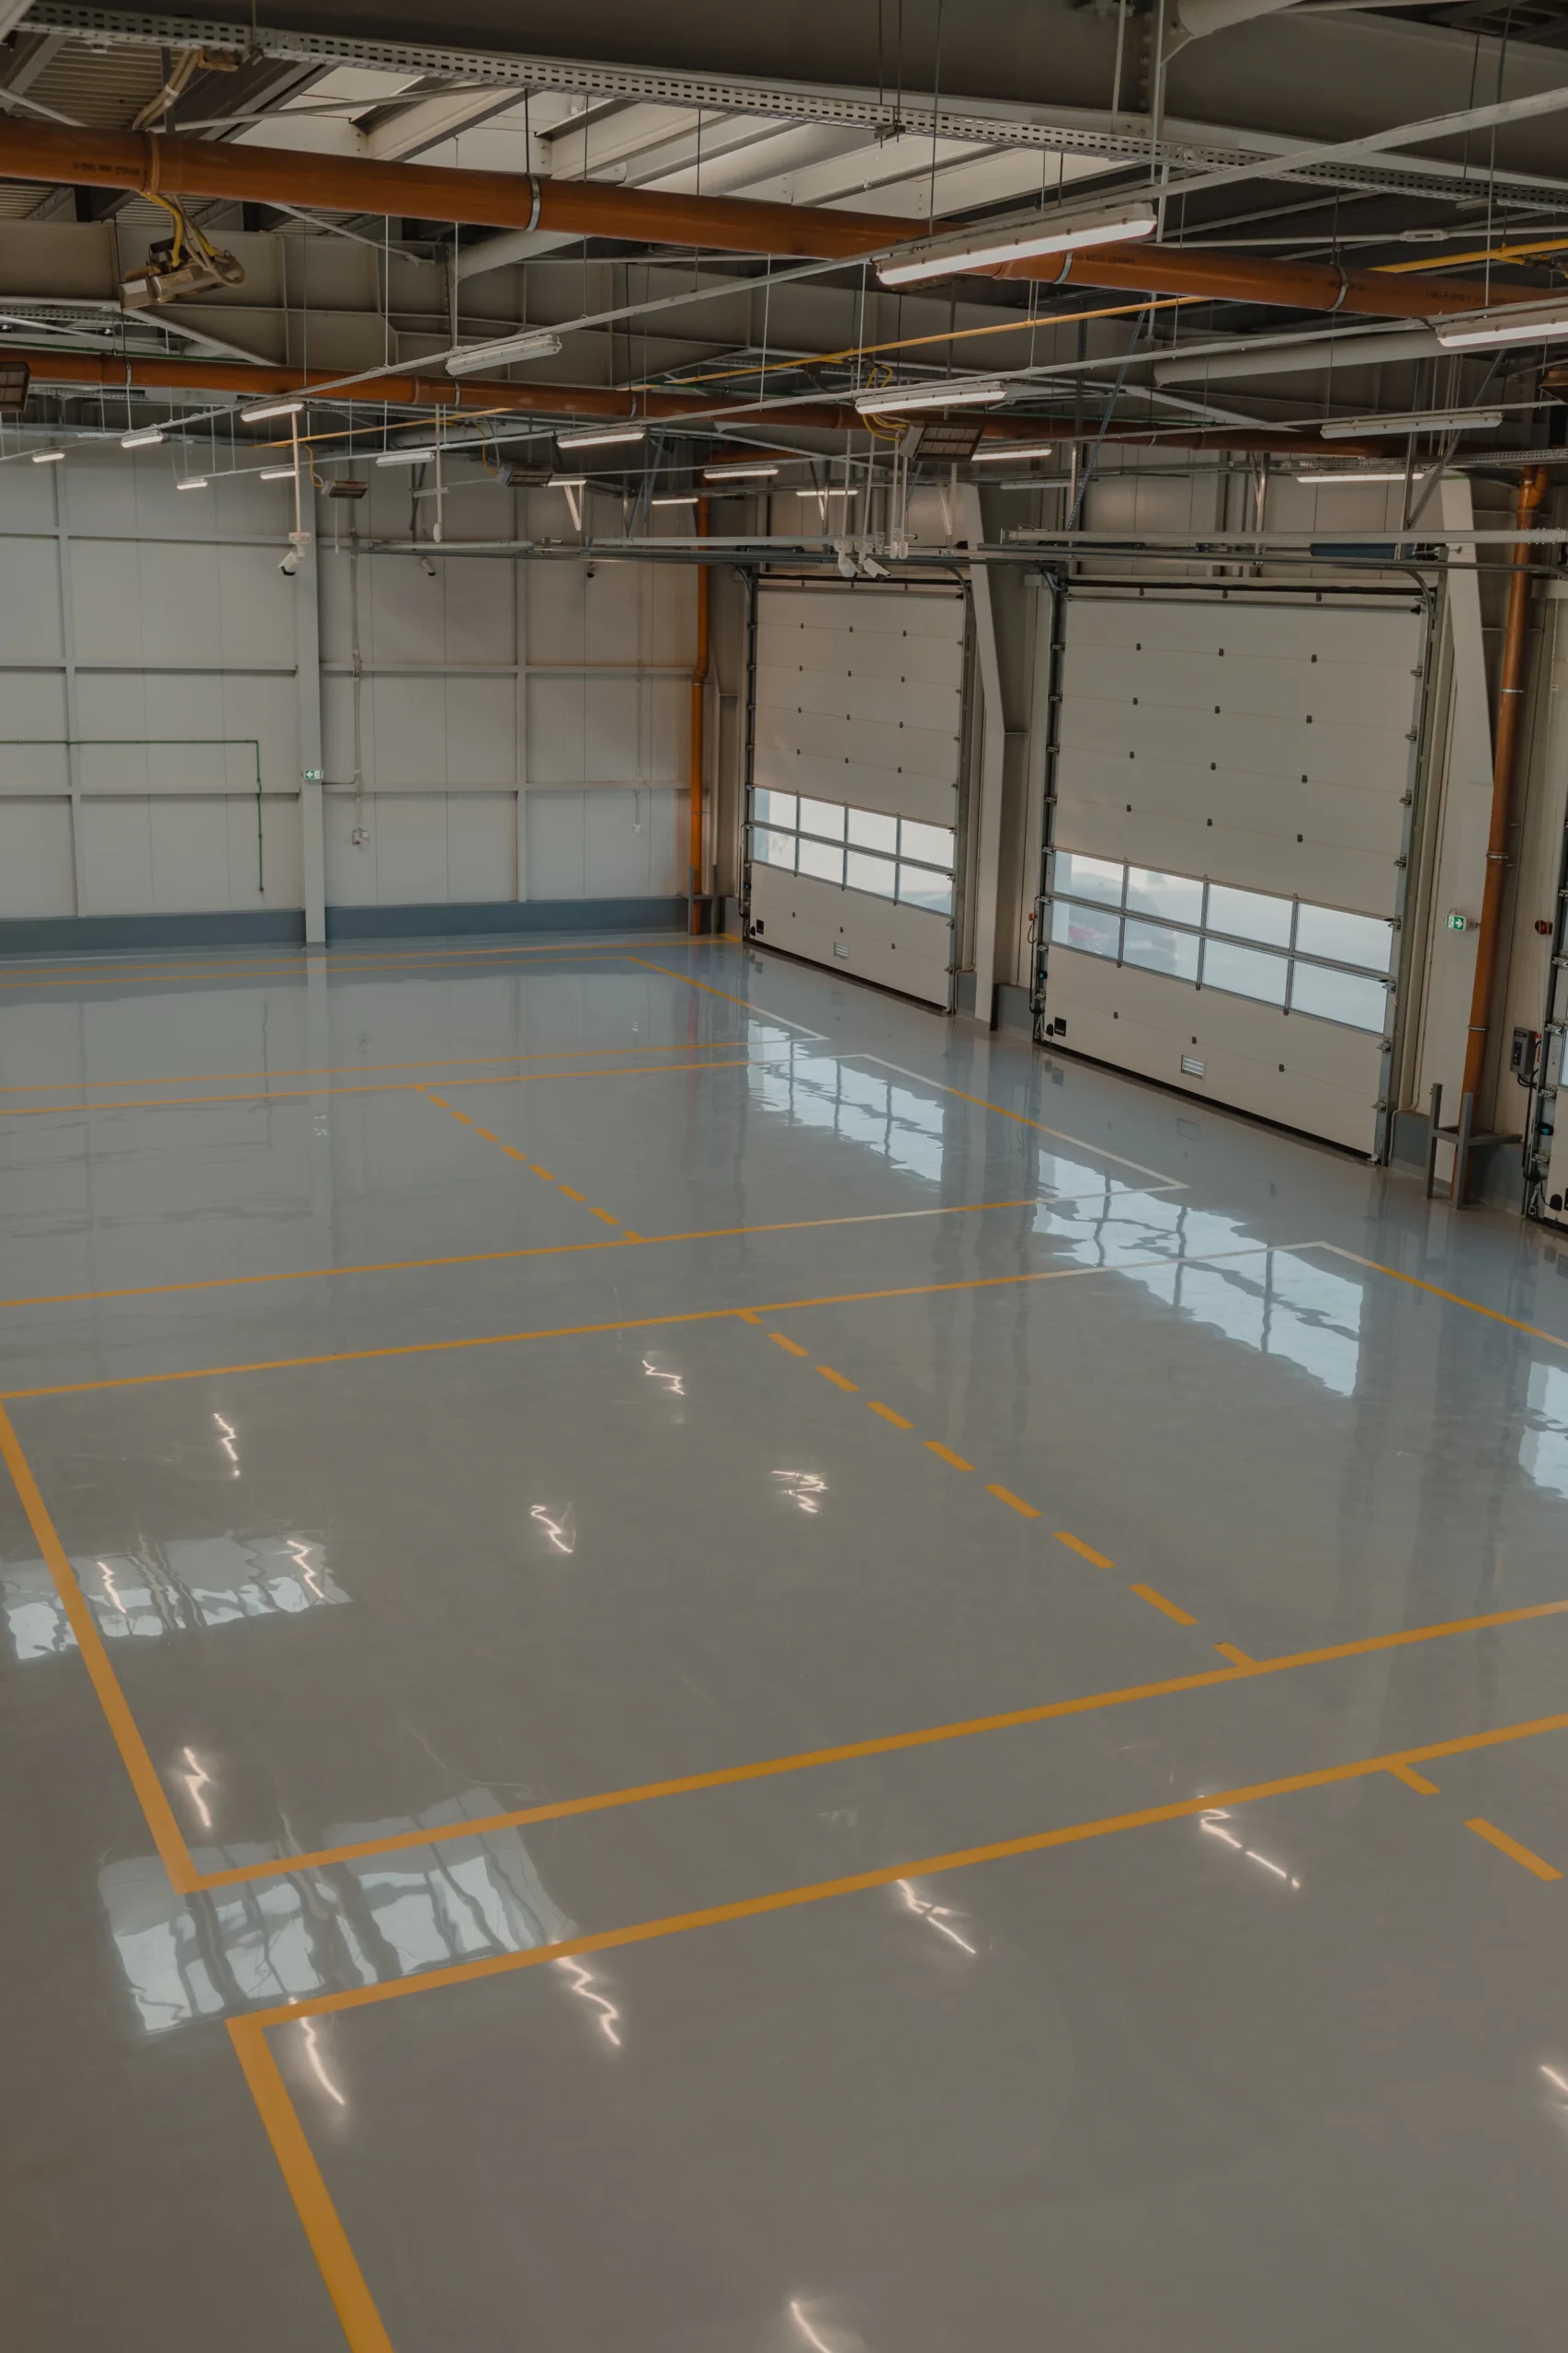 Residential & Commercial Epoxy Services in Southern Ohio